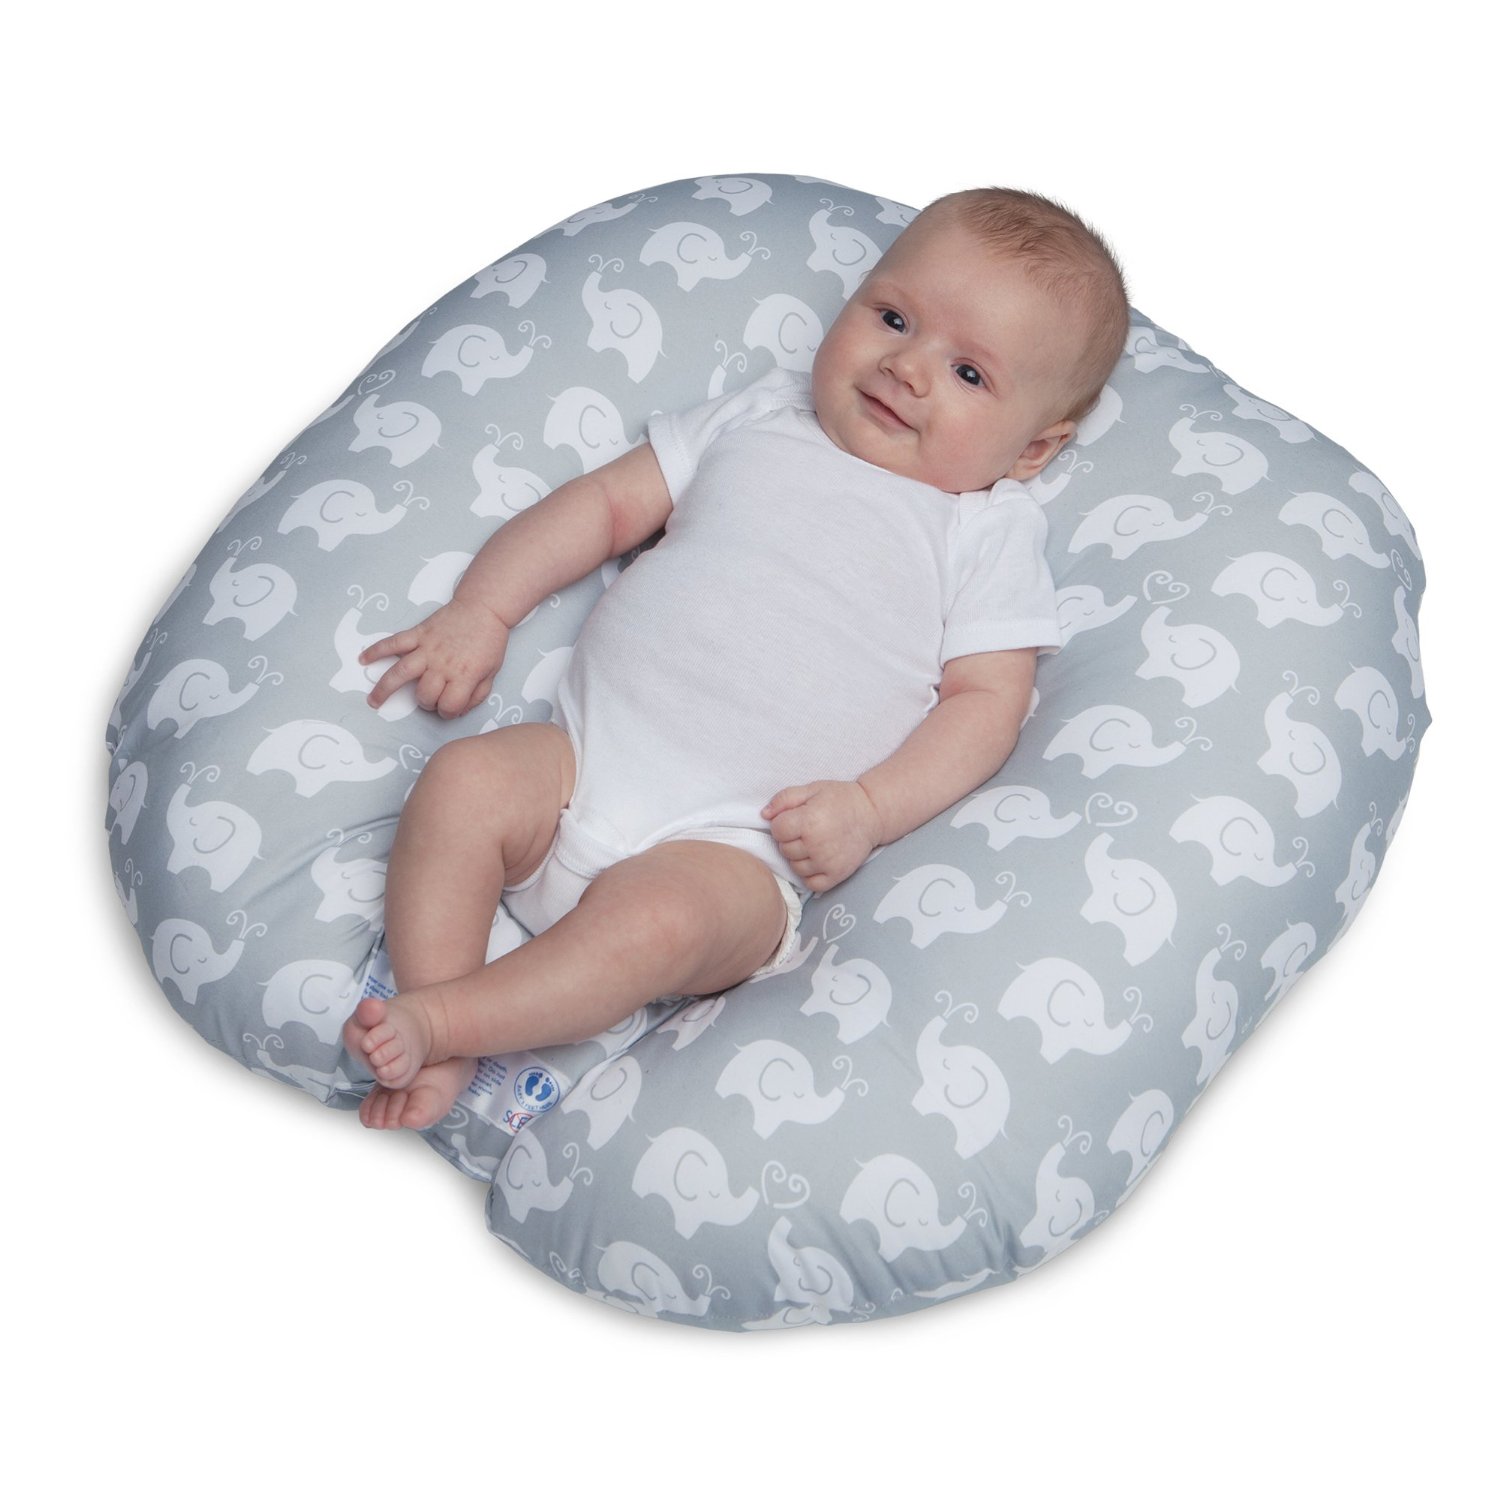 Inexpensive baby shower gift idea - a newborn boppy pillow.  ALL moms want and NEED this.